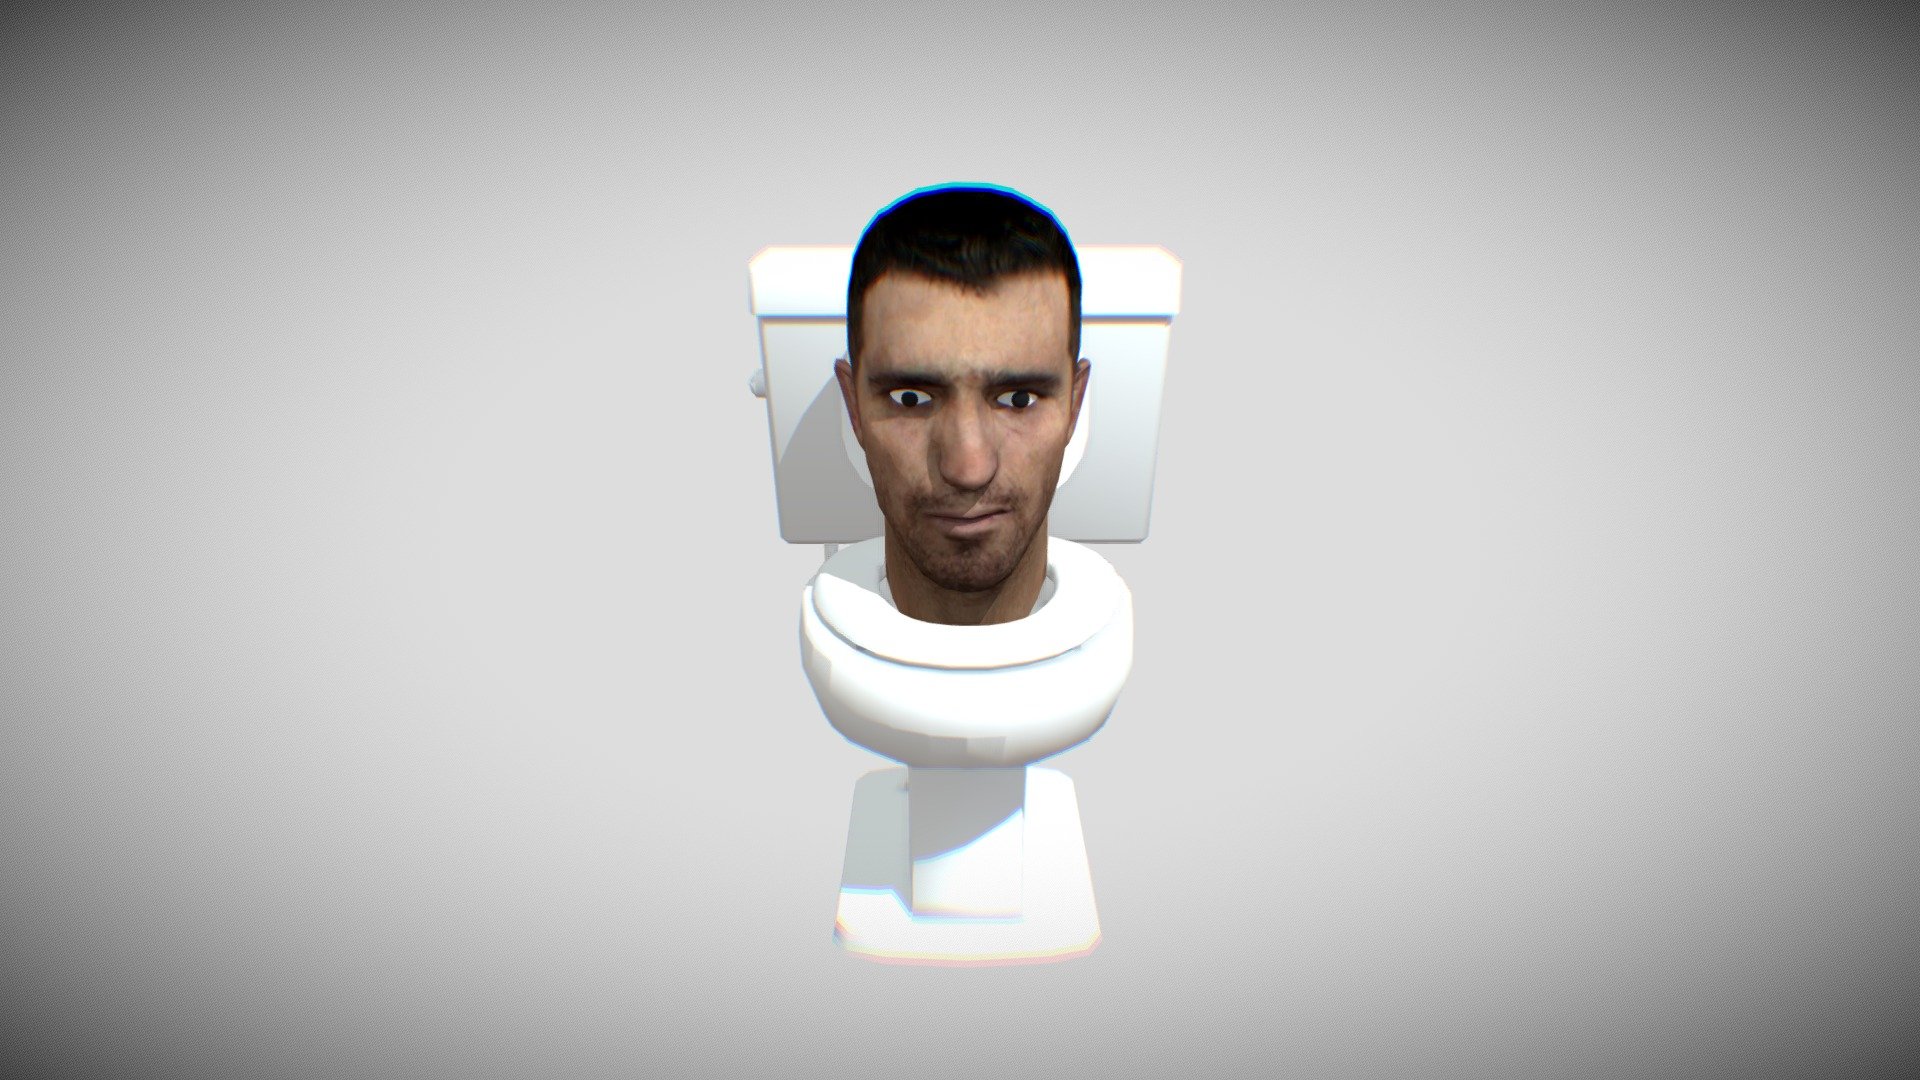 The original Skibidi Toilet model.
Make sure to download the GLB file, if you choose the FBX file the textures may not works 3d model